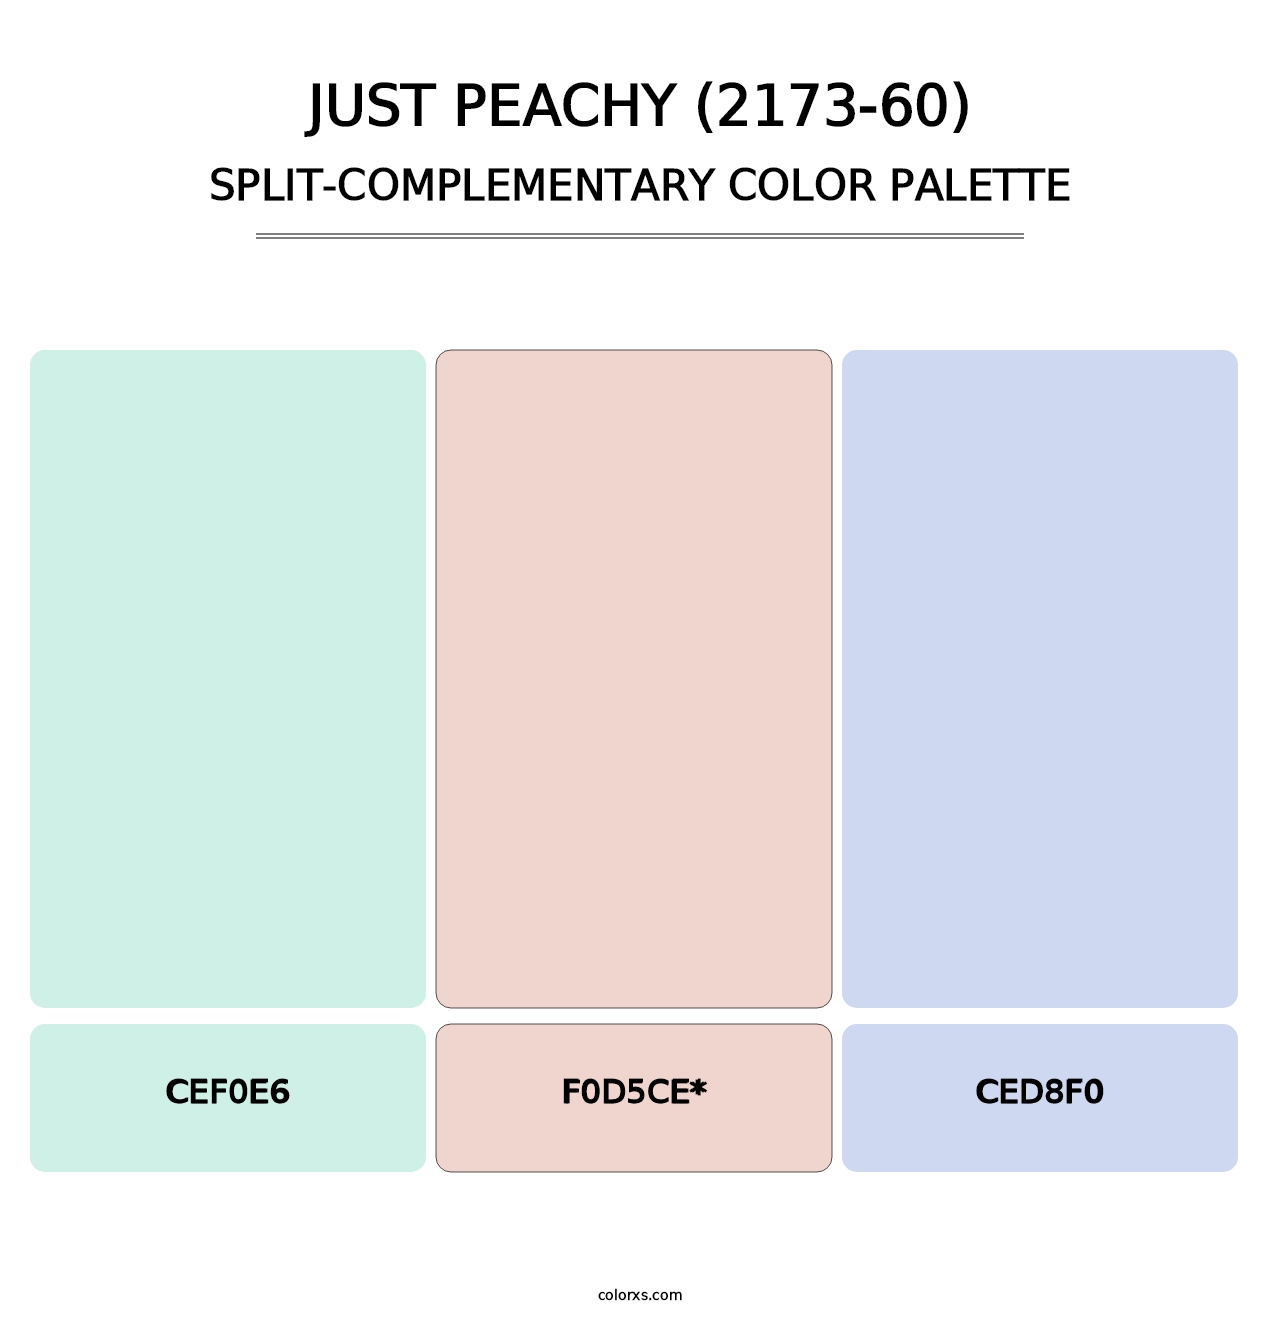 Just Peachy (2173-60) - Split-Complementary Color Palette